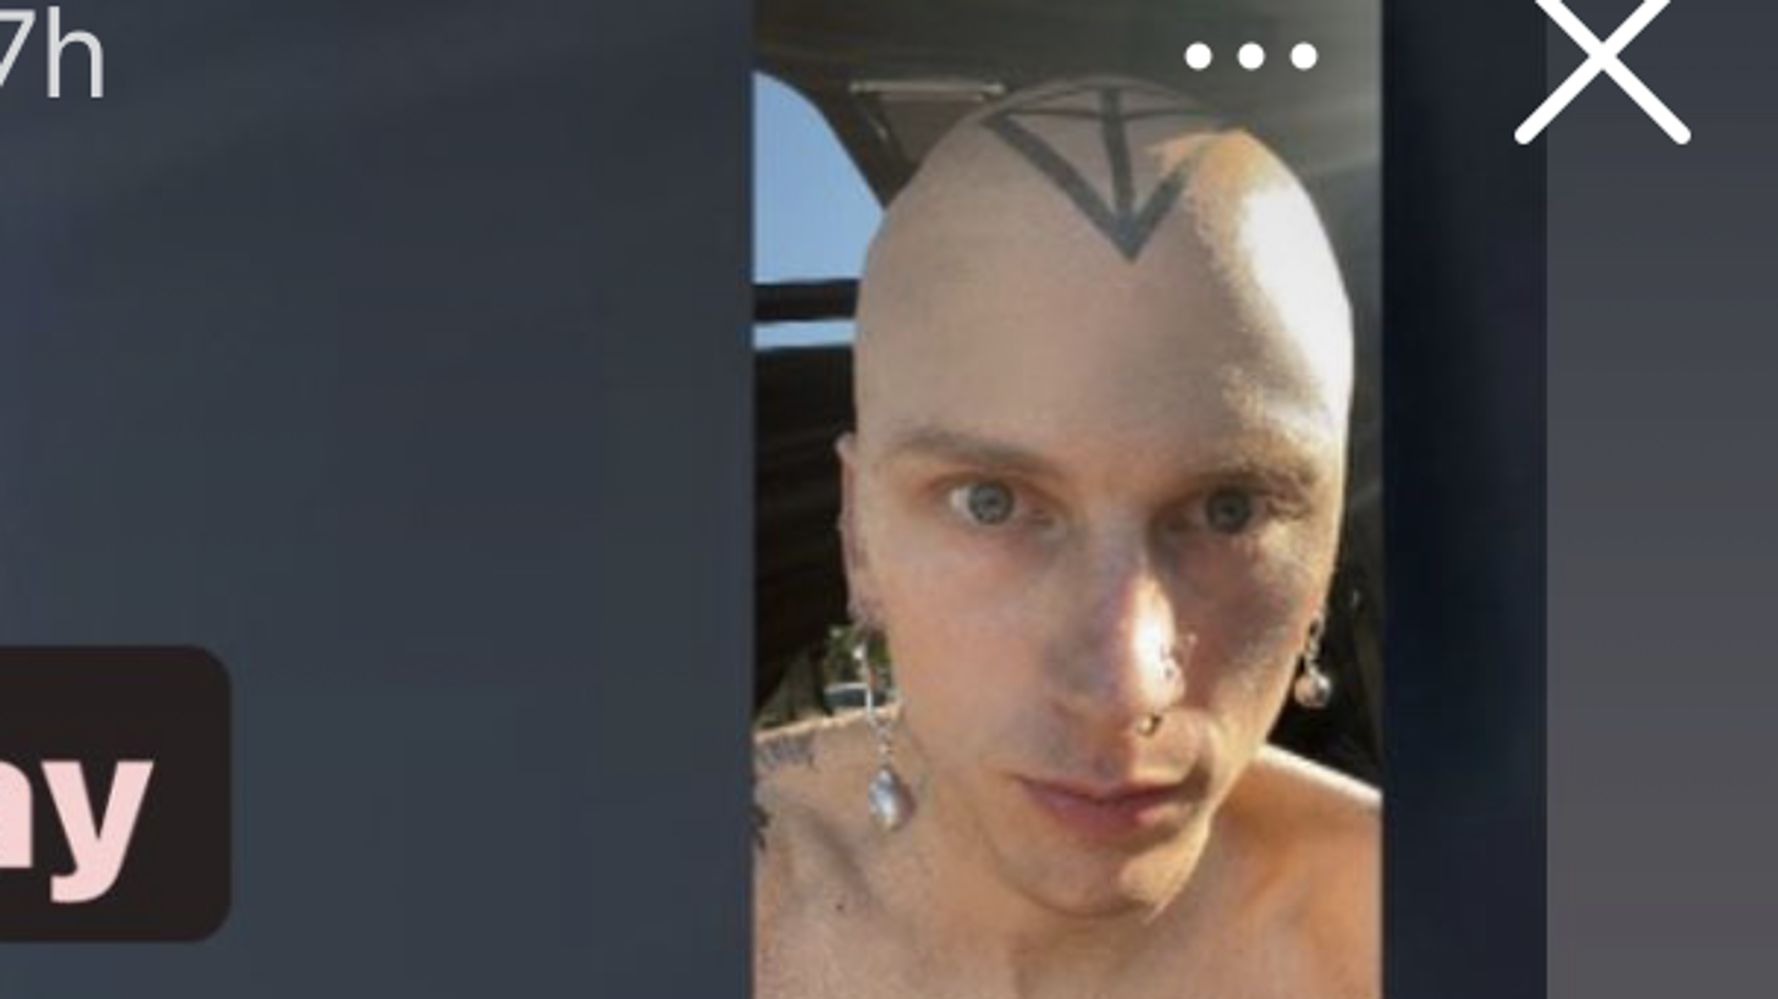 Machine Gun Kelly Apparently Shaved His Head And Is Sporting A Massive Head Tattoo